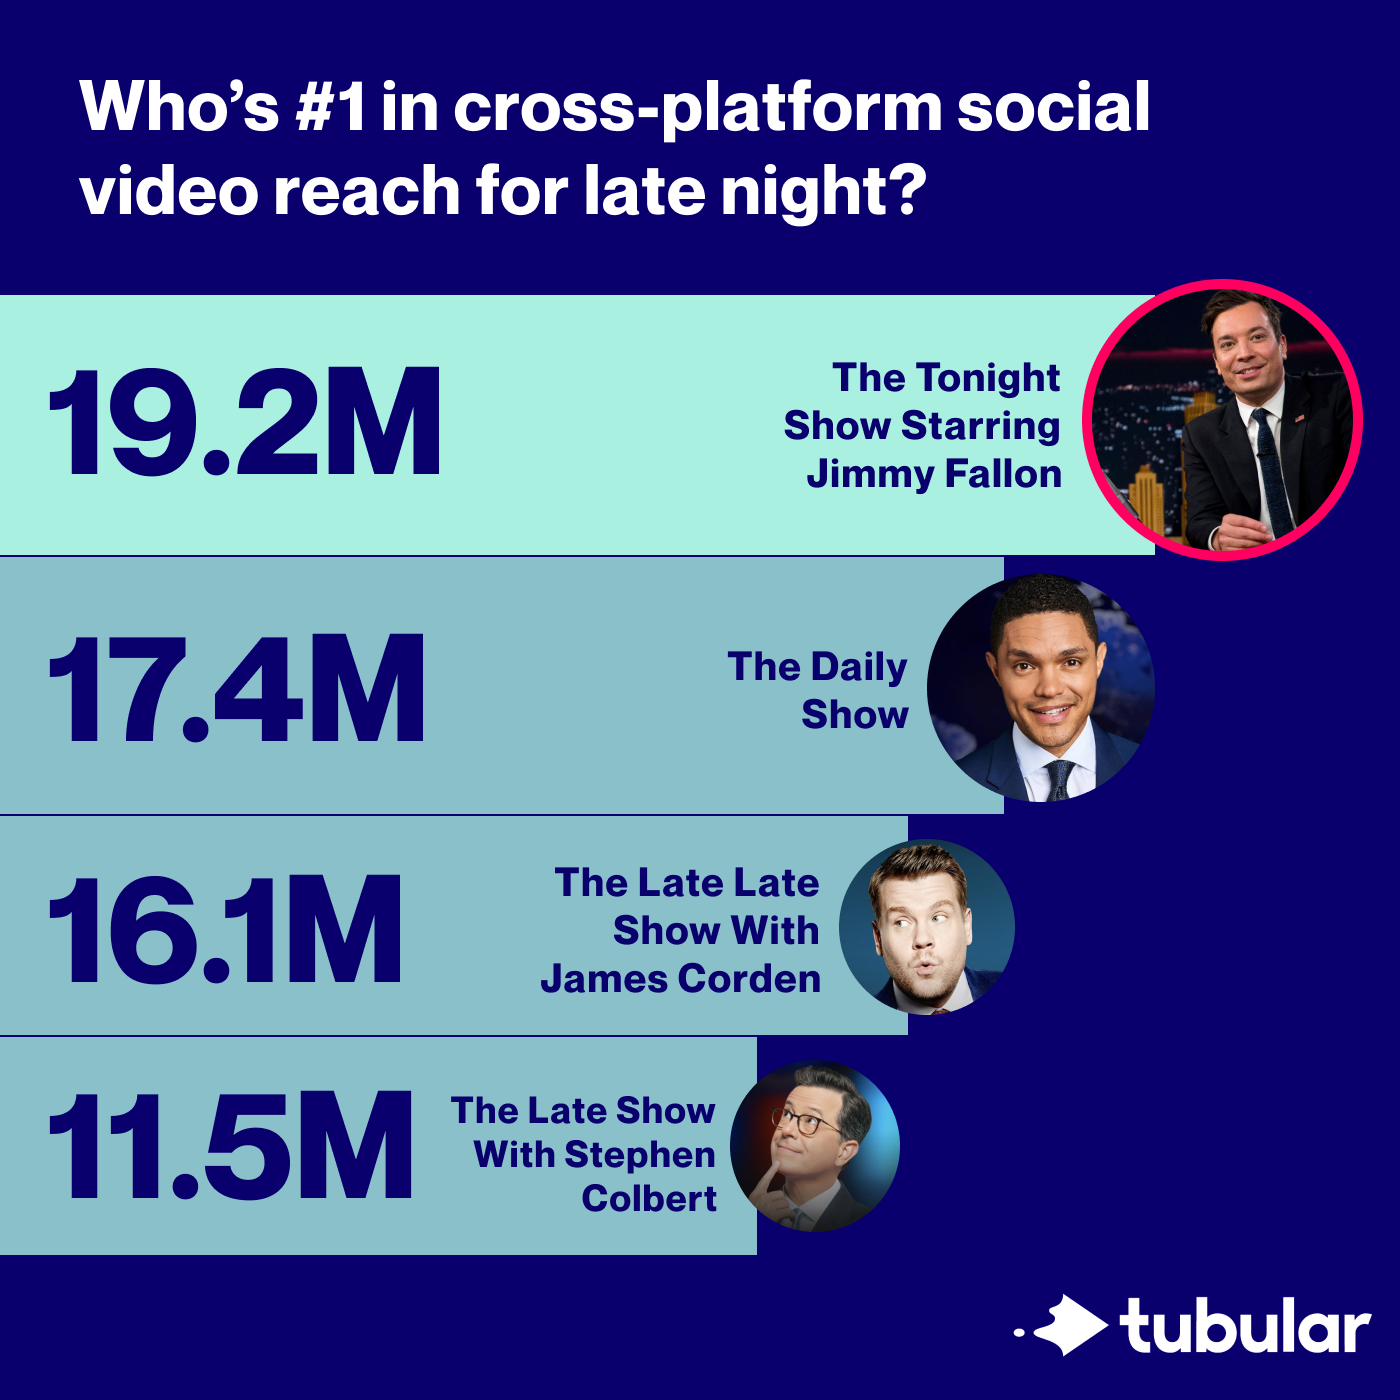 Compare Social Video Directly to TV with Tubular Audience Ratings ™